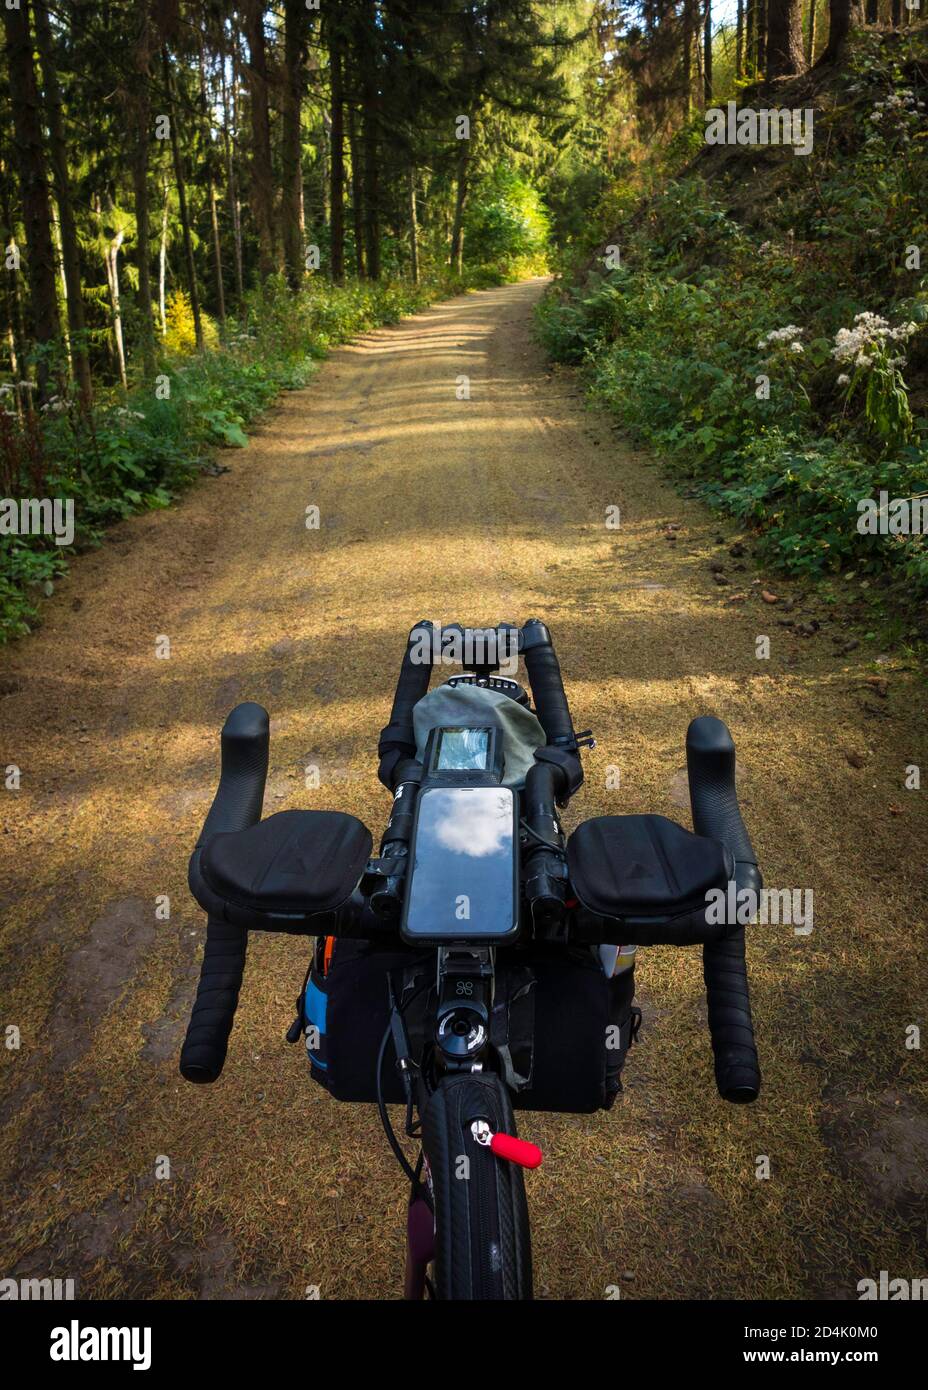 Looking from riders point of view over a bicycle handlebar with drop bars and aerobars and smart devices (phone + bike computer) onto a forest road. Stock Photo